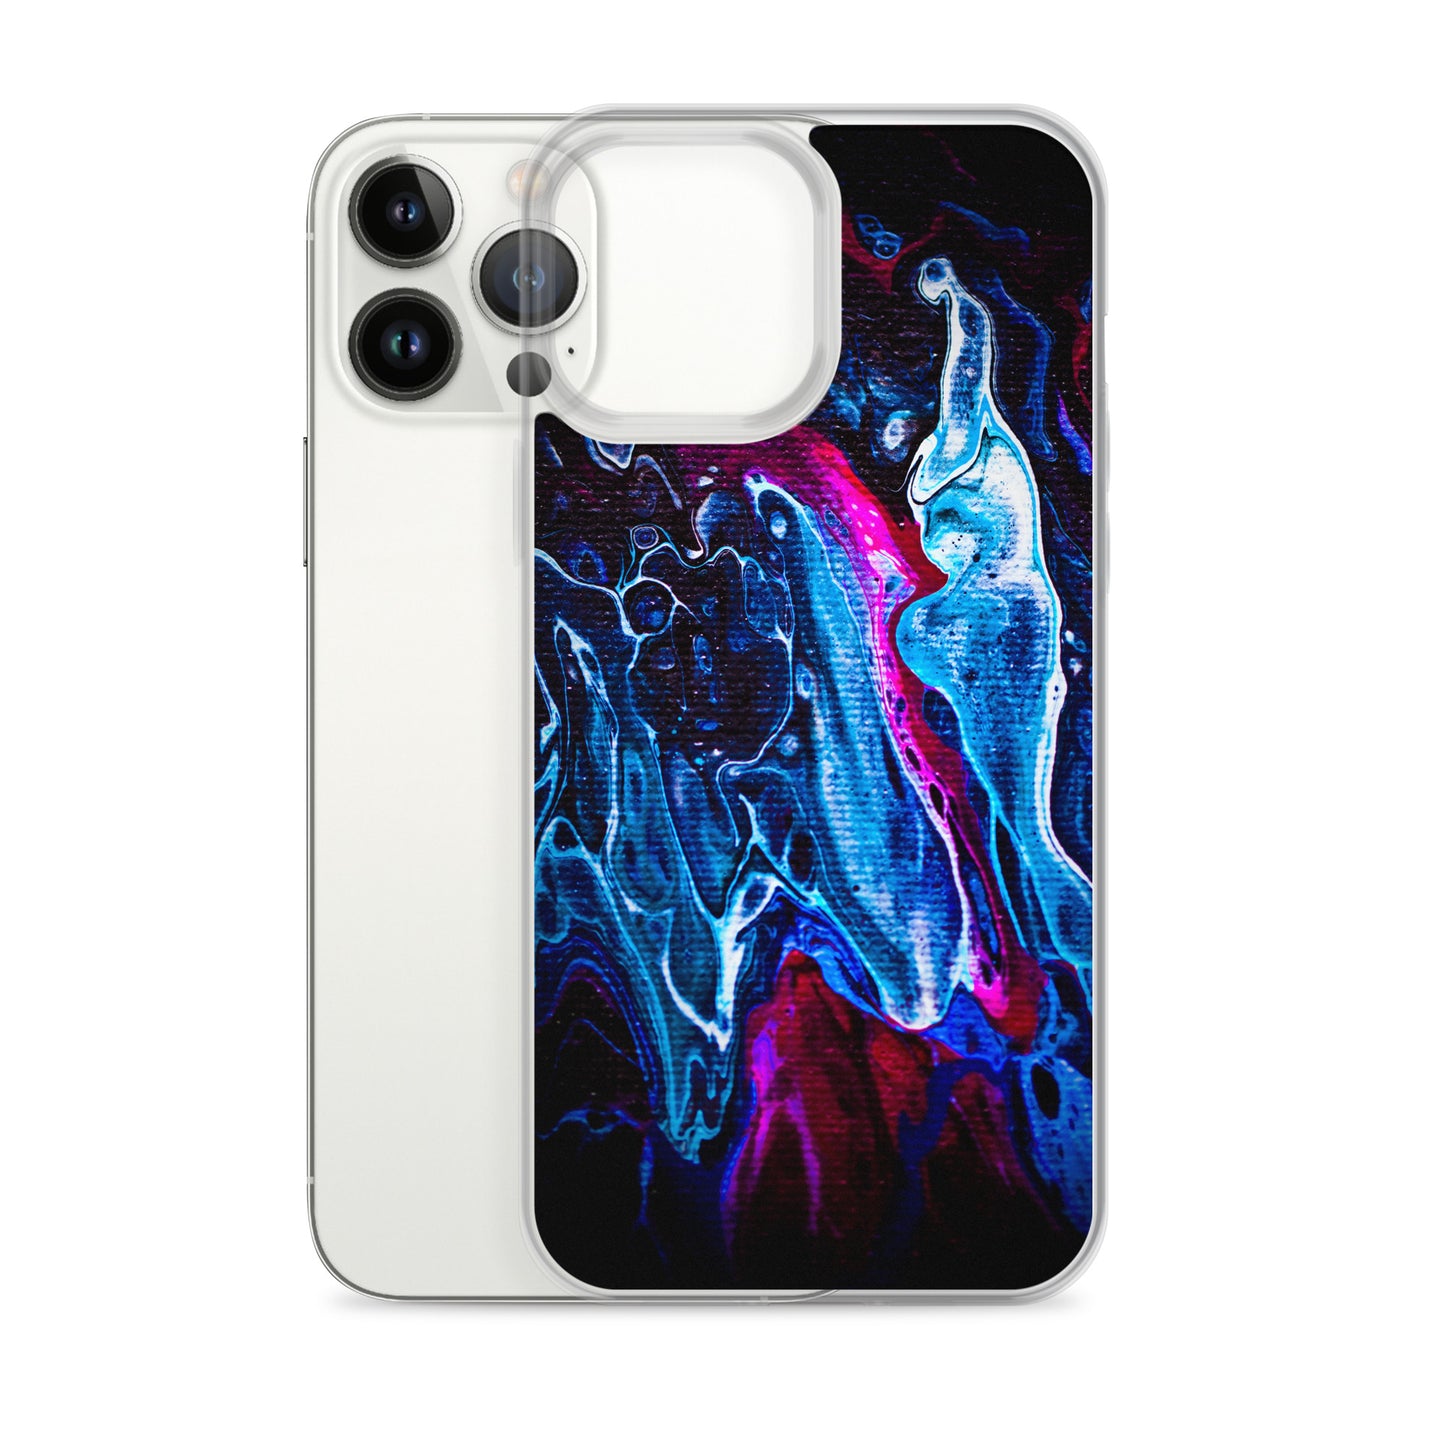 NightOwl Studio Custom Phone Case Compatible with iPhone, Ultra Slim Cover with Heavy Duty Scratch Resistant Protection, Blue Liquid